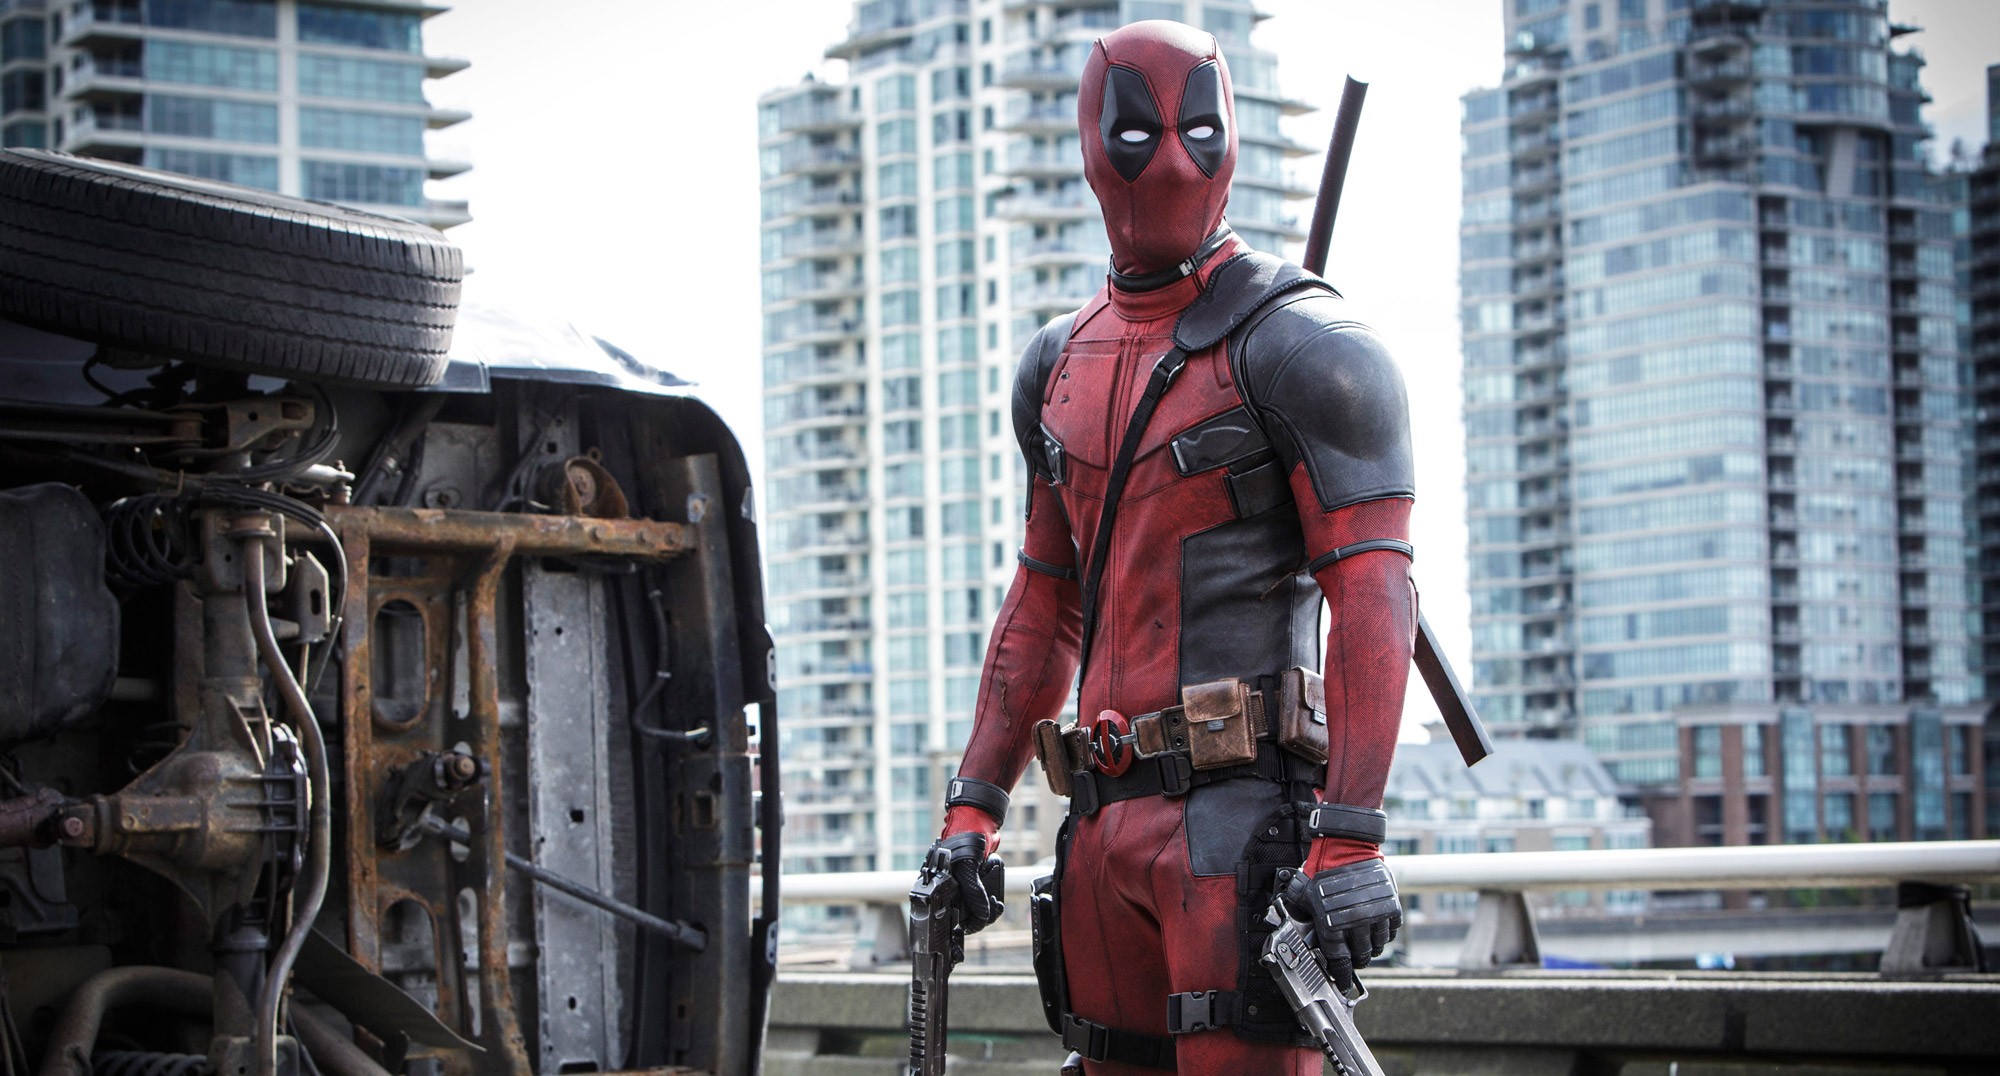 'Deadpool' fans fete movie's opening with cast